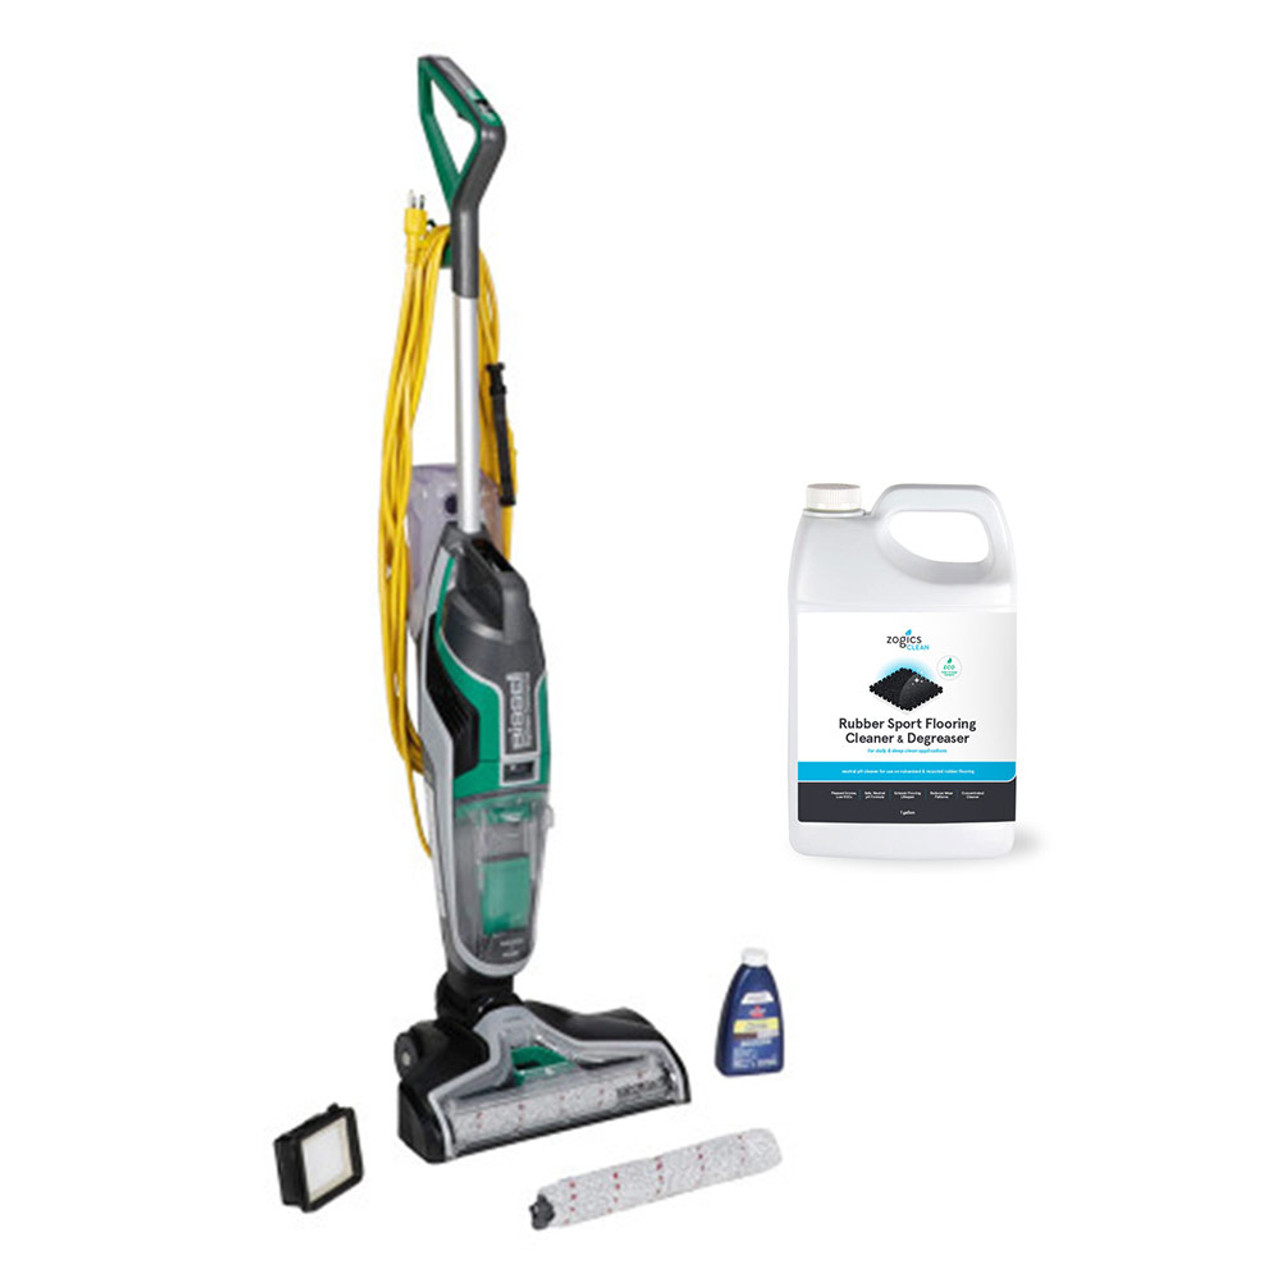 https://cdn11.bigcommerce.com/s-8mji1/images/stencil/1280x1280/products/7936/26532/BGFW13-CLNRFC128CN_all_in_one_sports_floor_cleaning_bundle__88569.1697468720.jpg?c=2